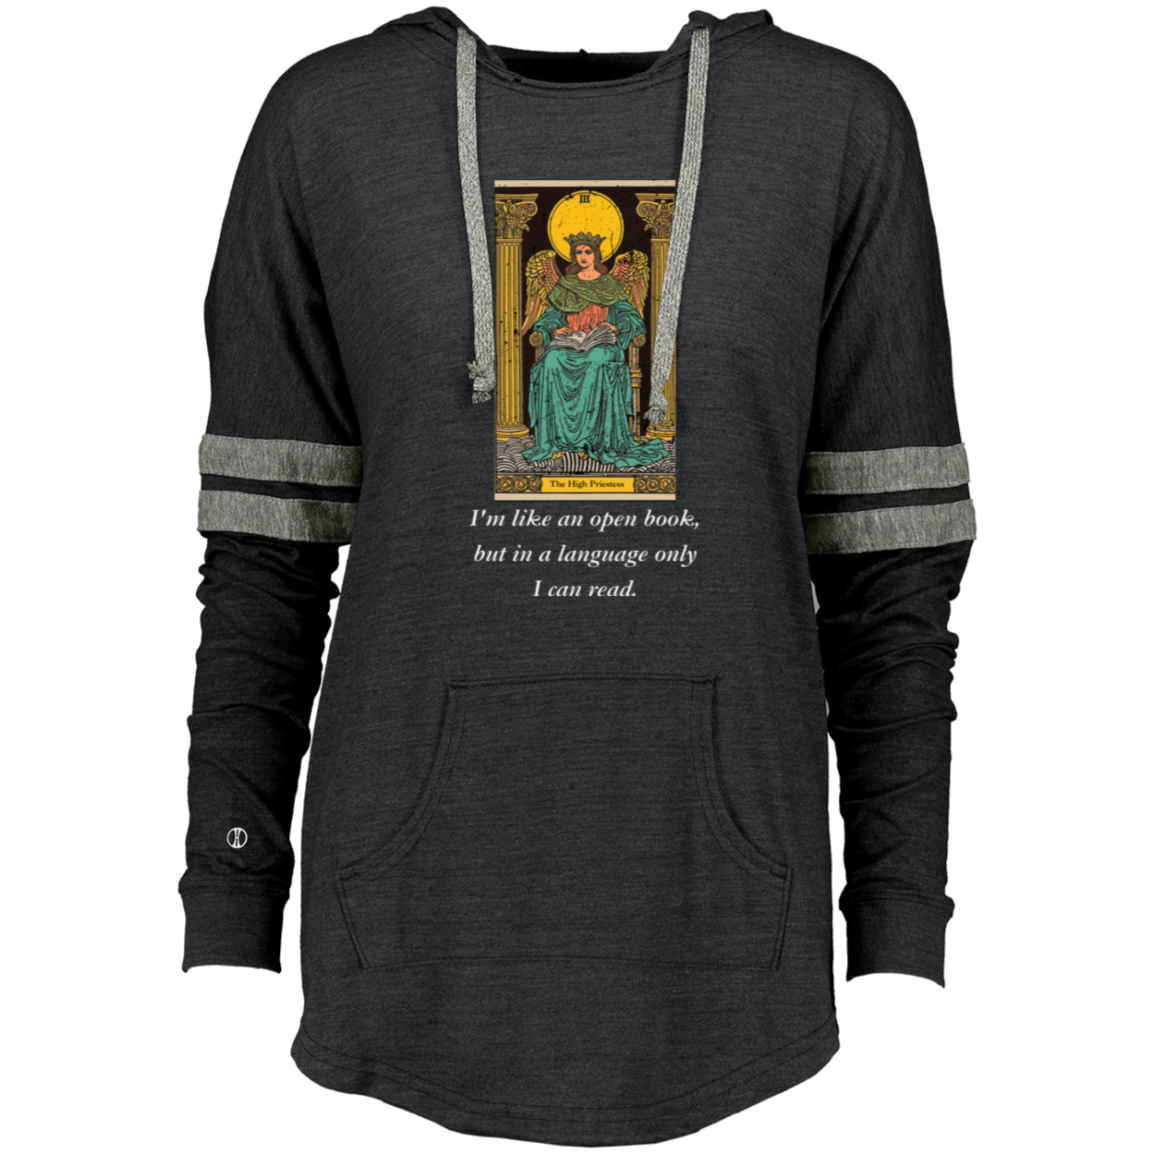 Funny the high priestess women's black tarot card hoodie pullover from BLK Moon Shop